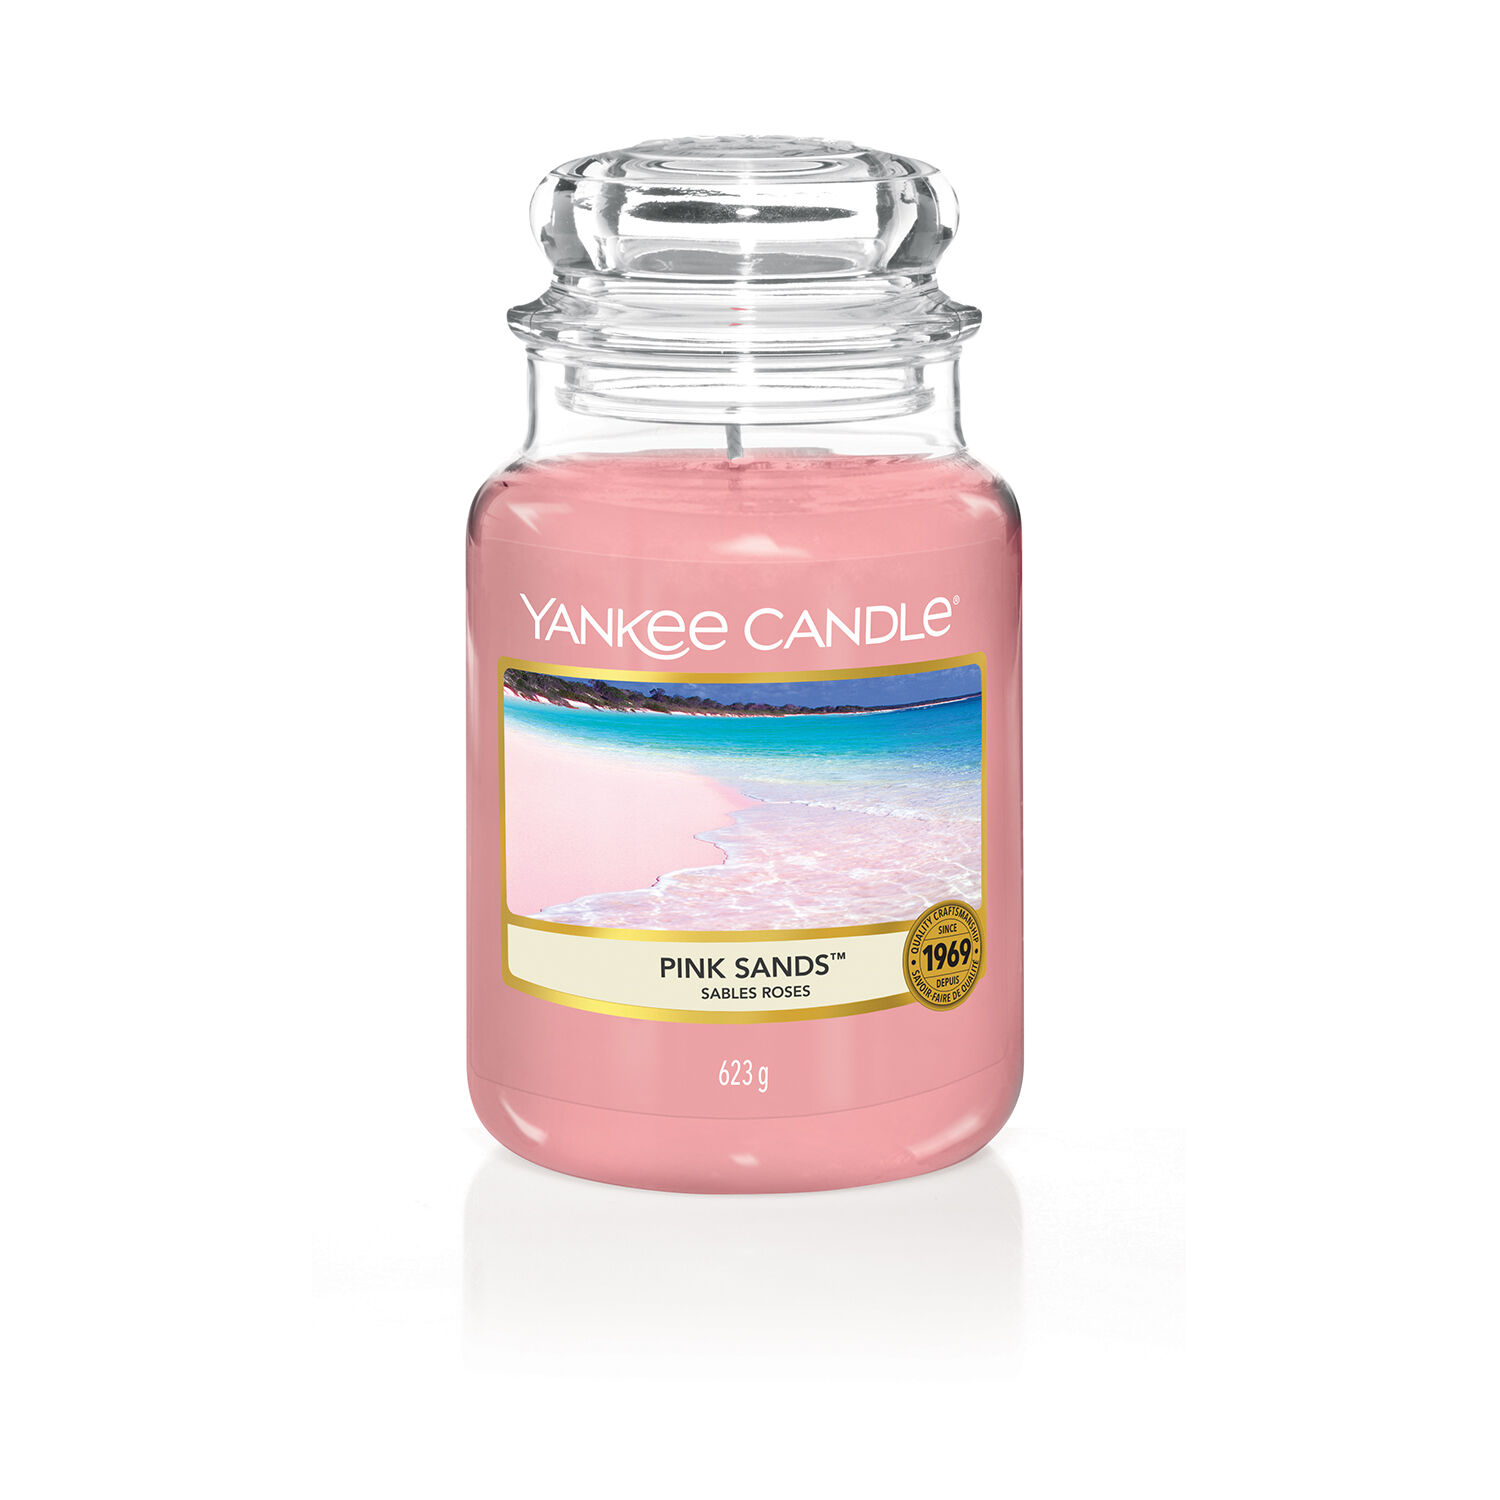  Yankee Candle Pink Sands Wax Melts, 3 Packs of 6 (18  Total),Light Pink : Home & Kitchen